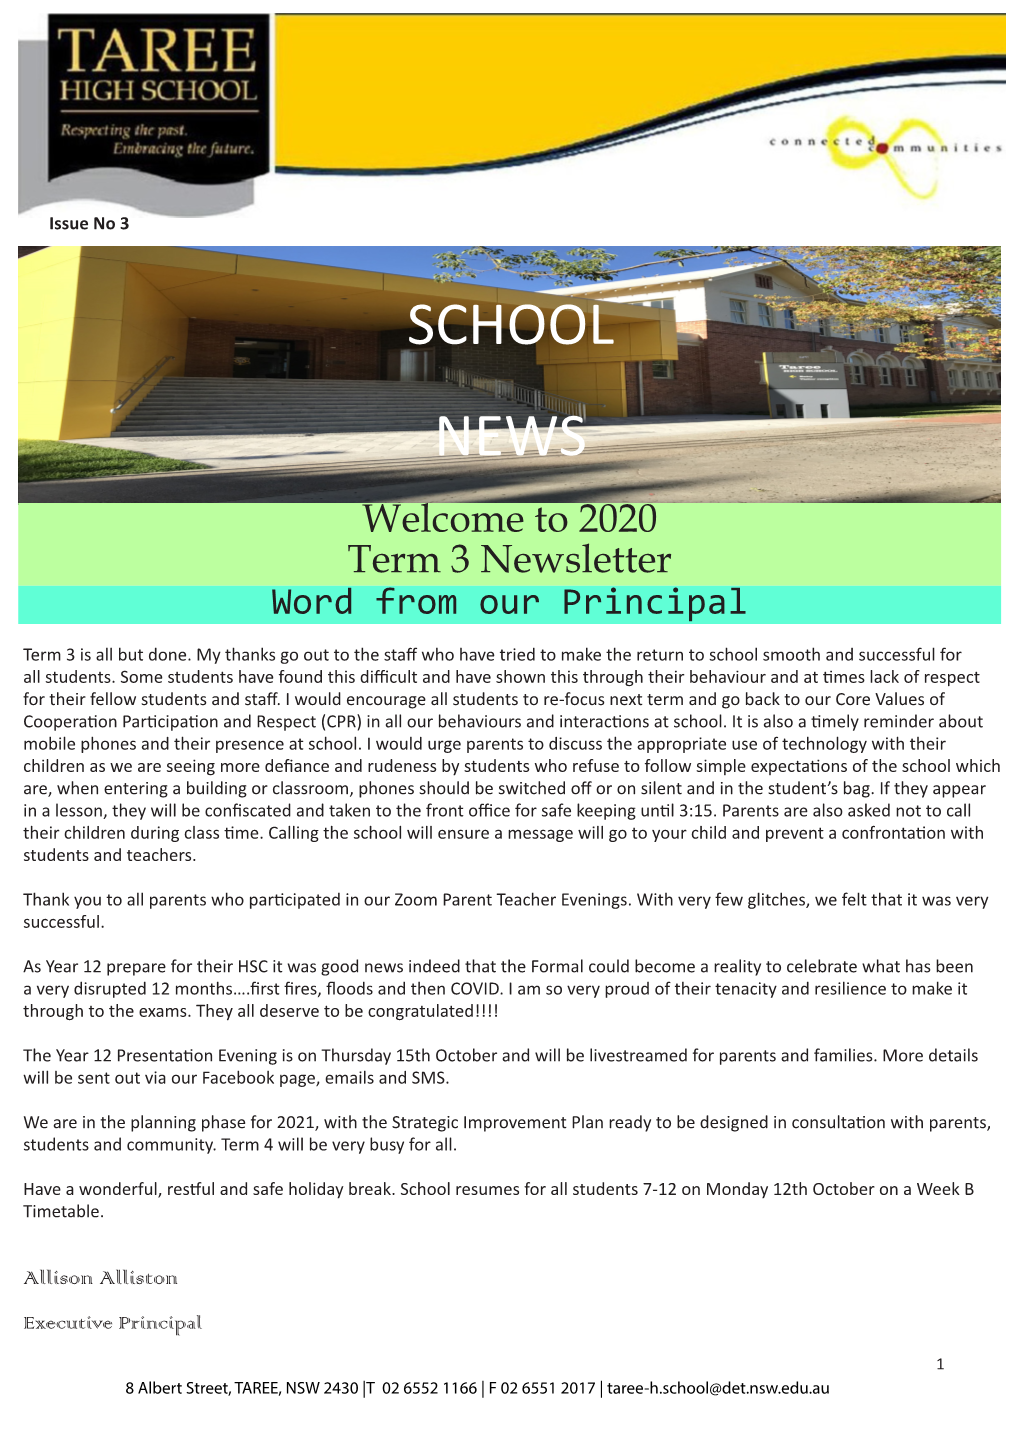 Term 3 Newsletter Word from Our Principal